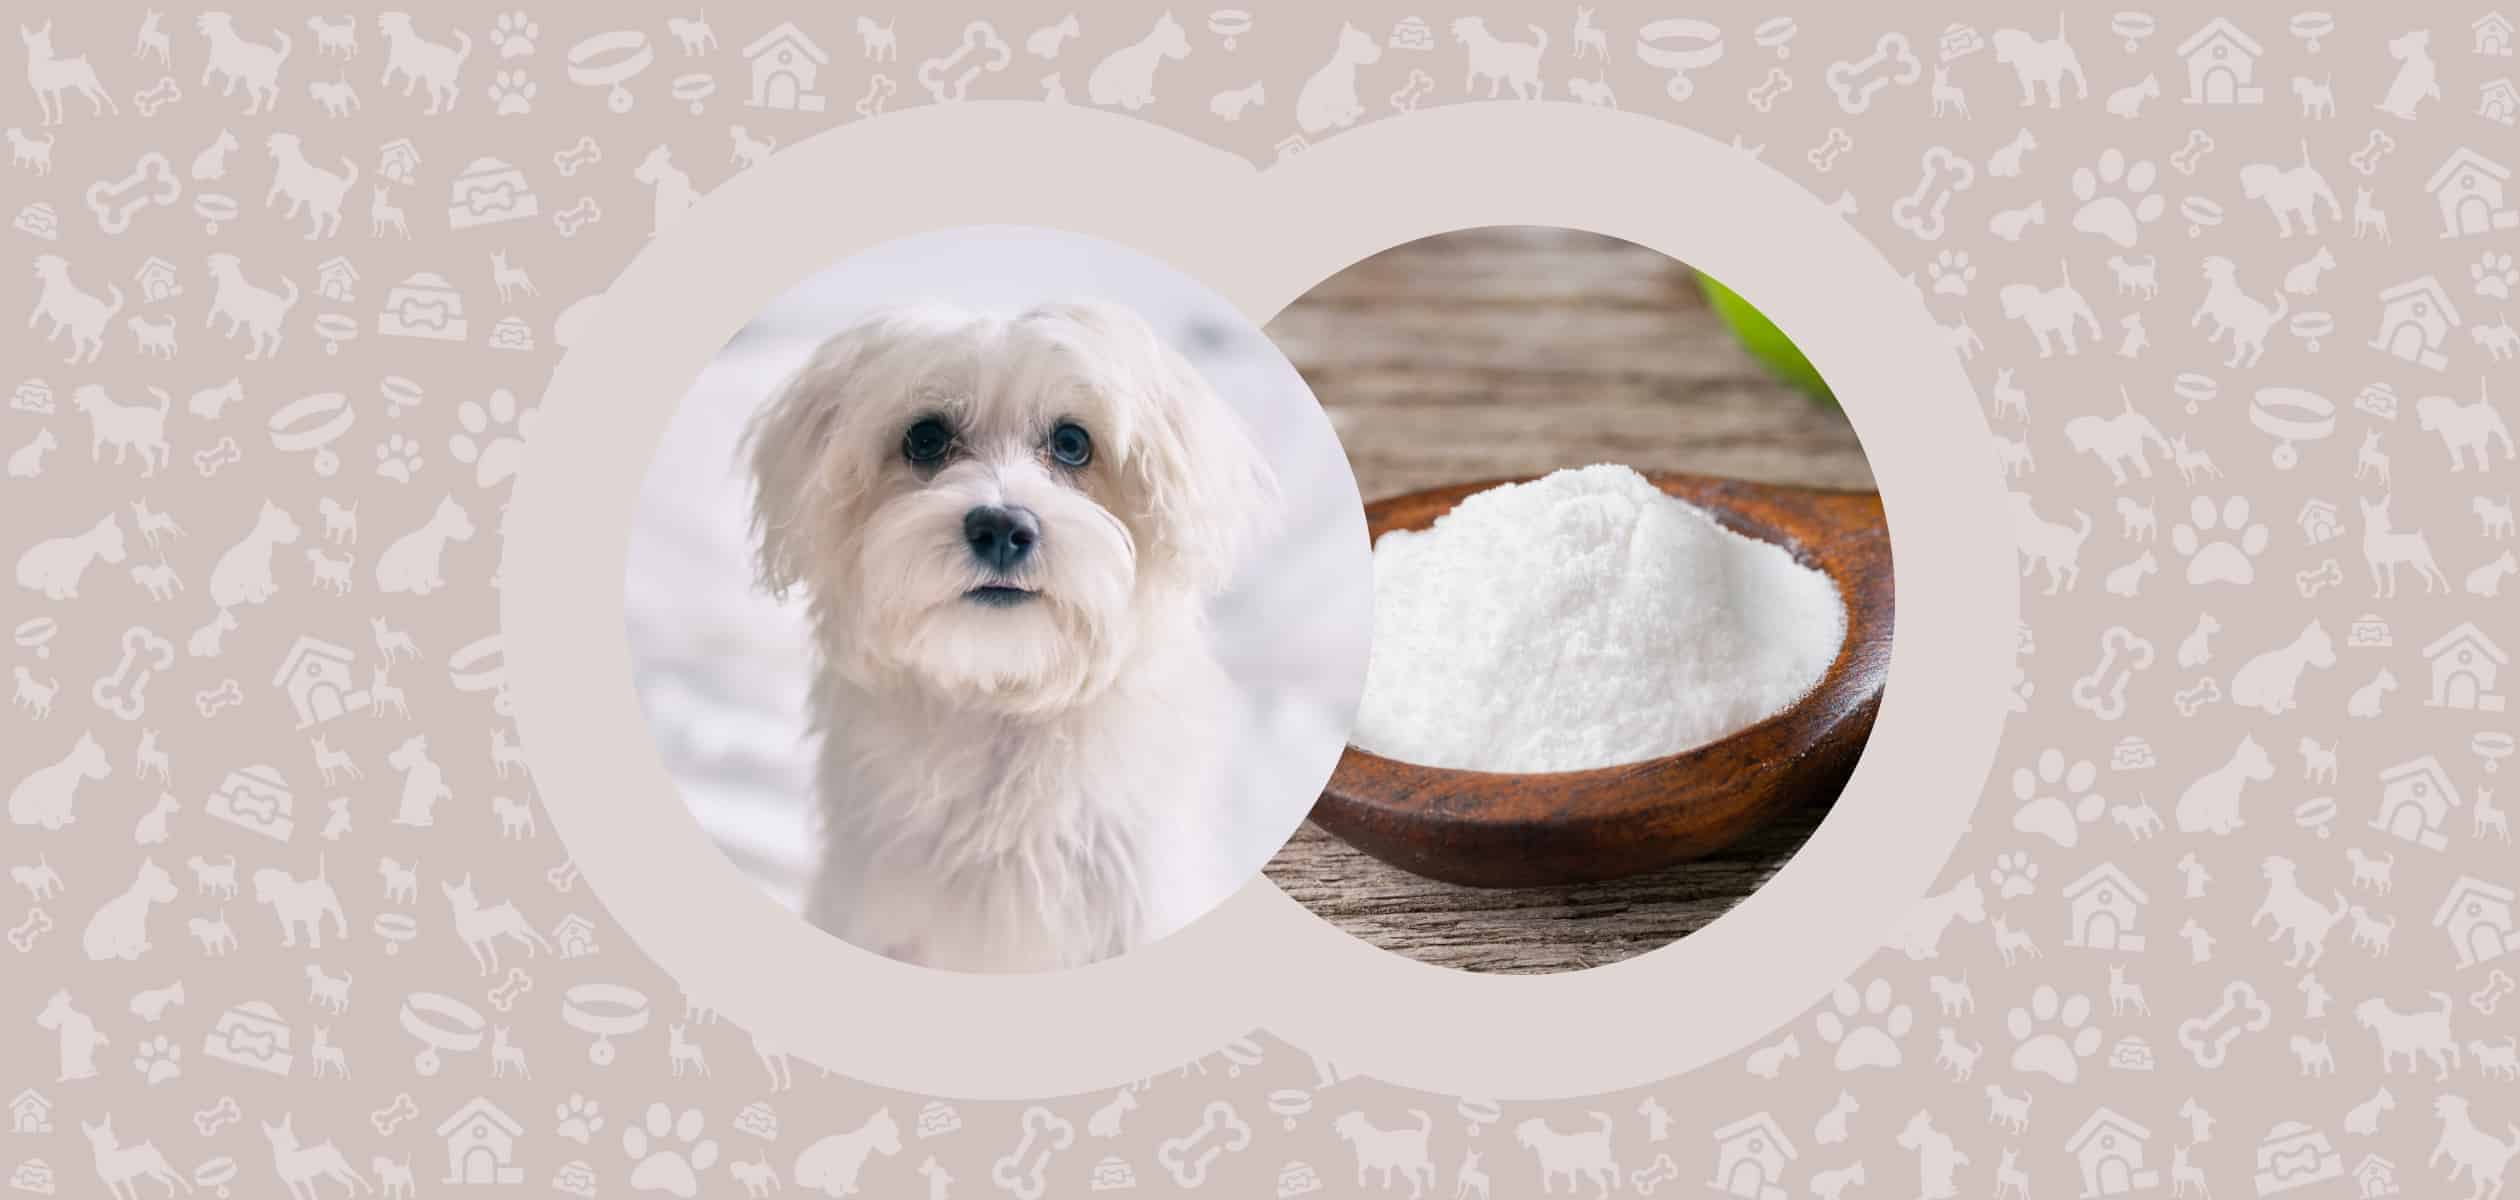 can dogs have baking soda